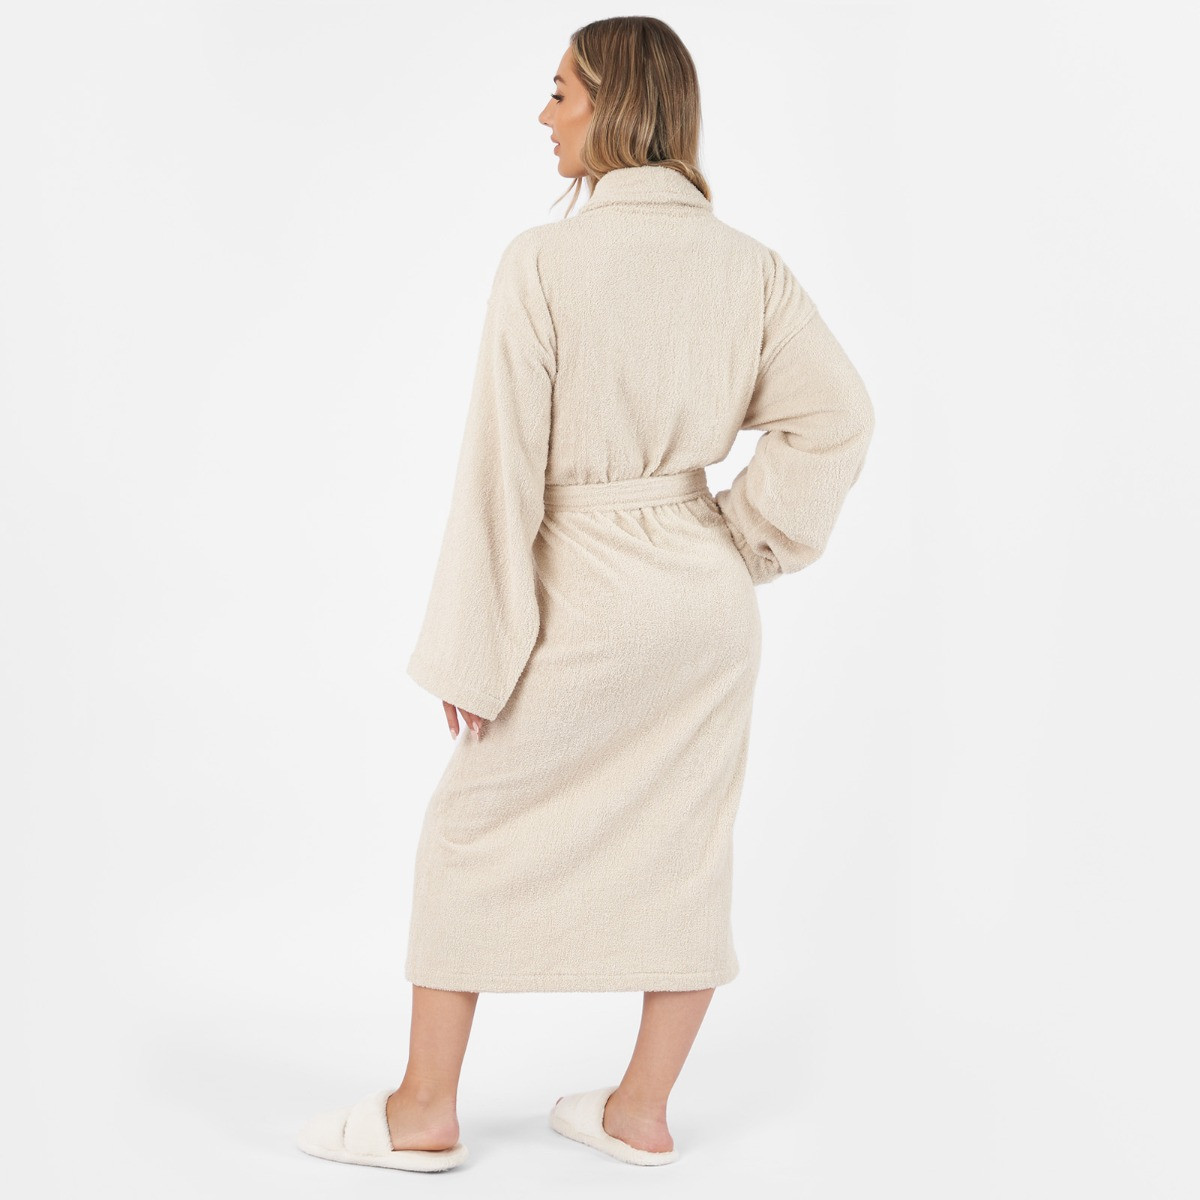 Brentfords 100% Cotton Towelling Dressing Gown, Adults - Natural Beige>